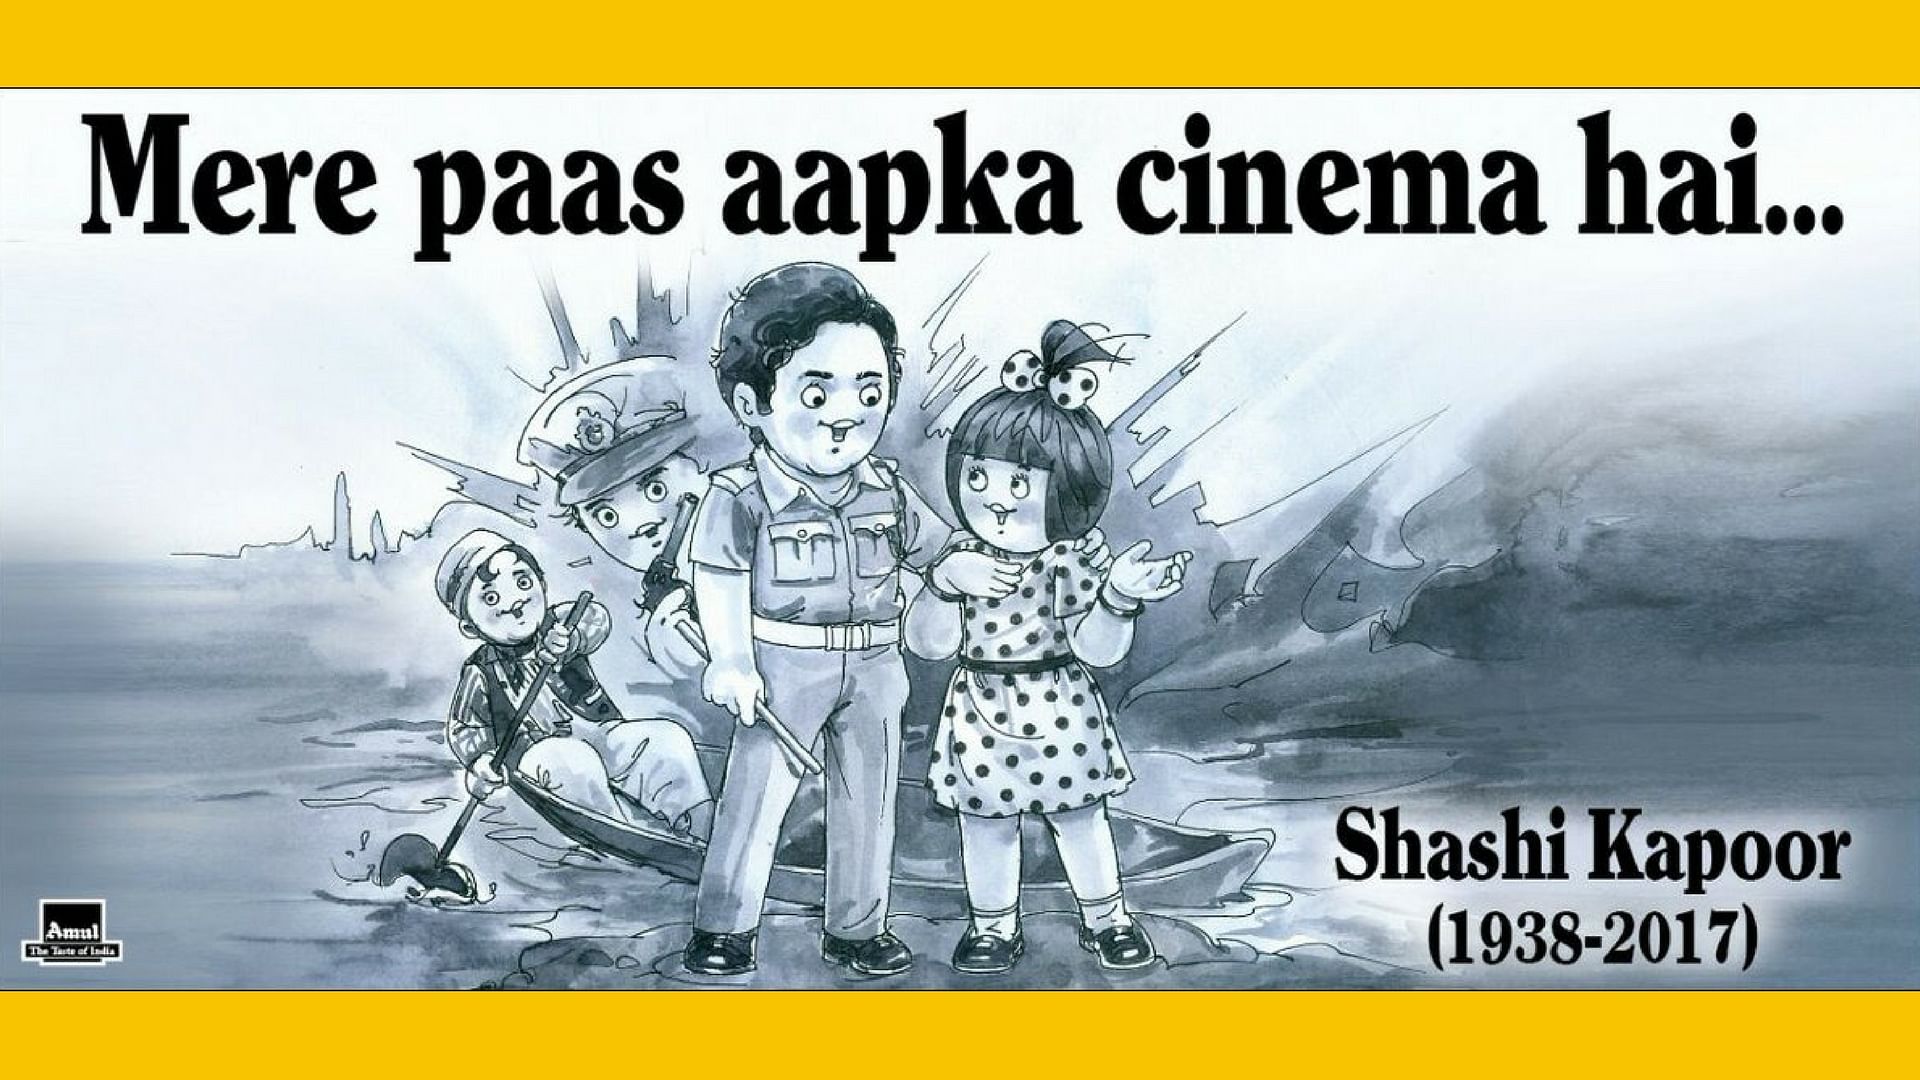 Amul pays a touching tribute to Shashi Kapoor.&nbsp;